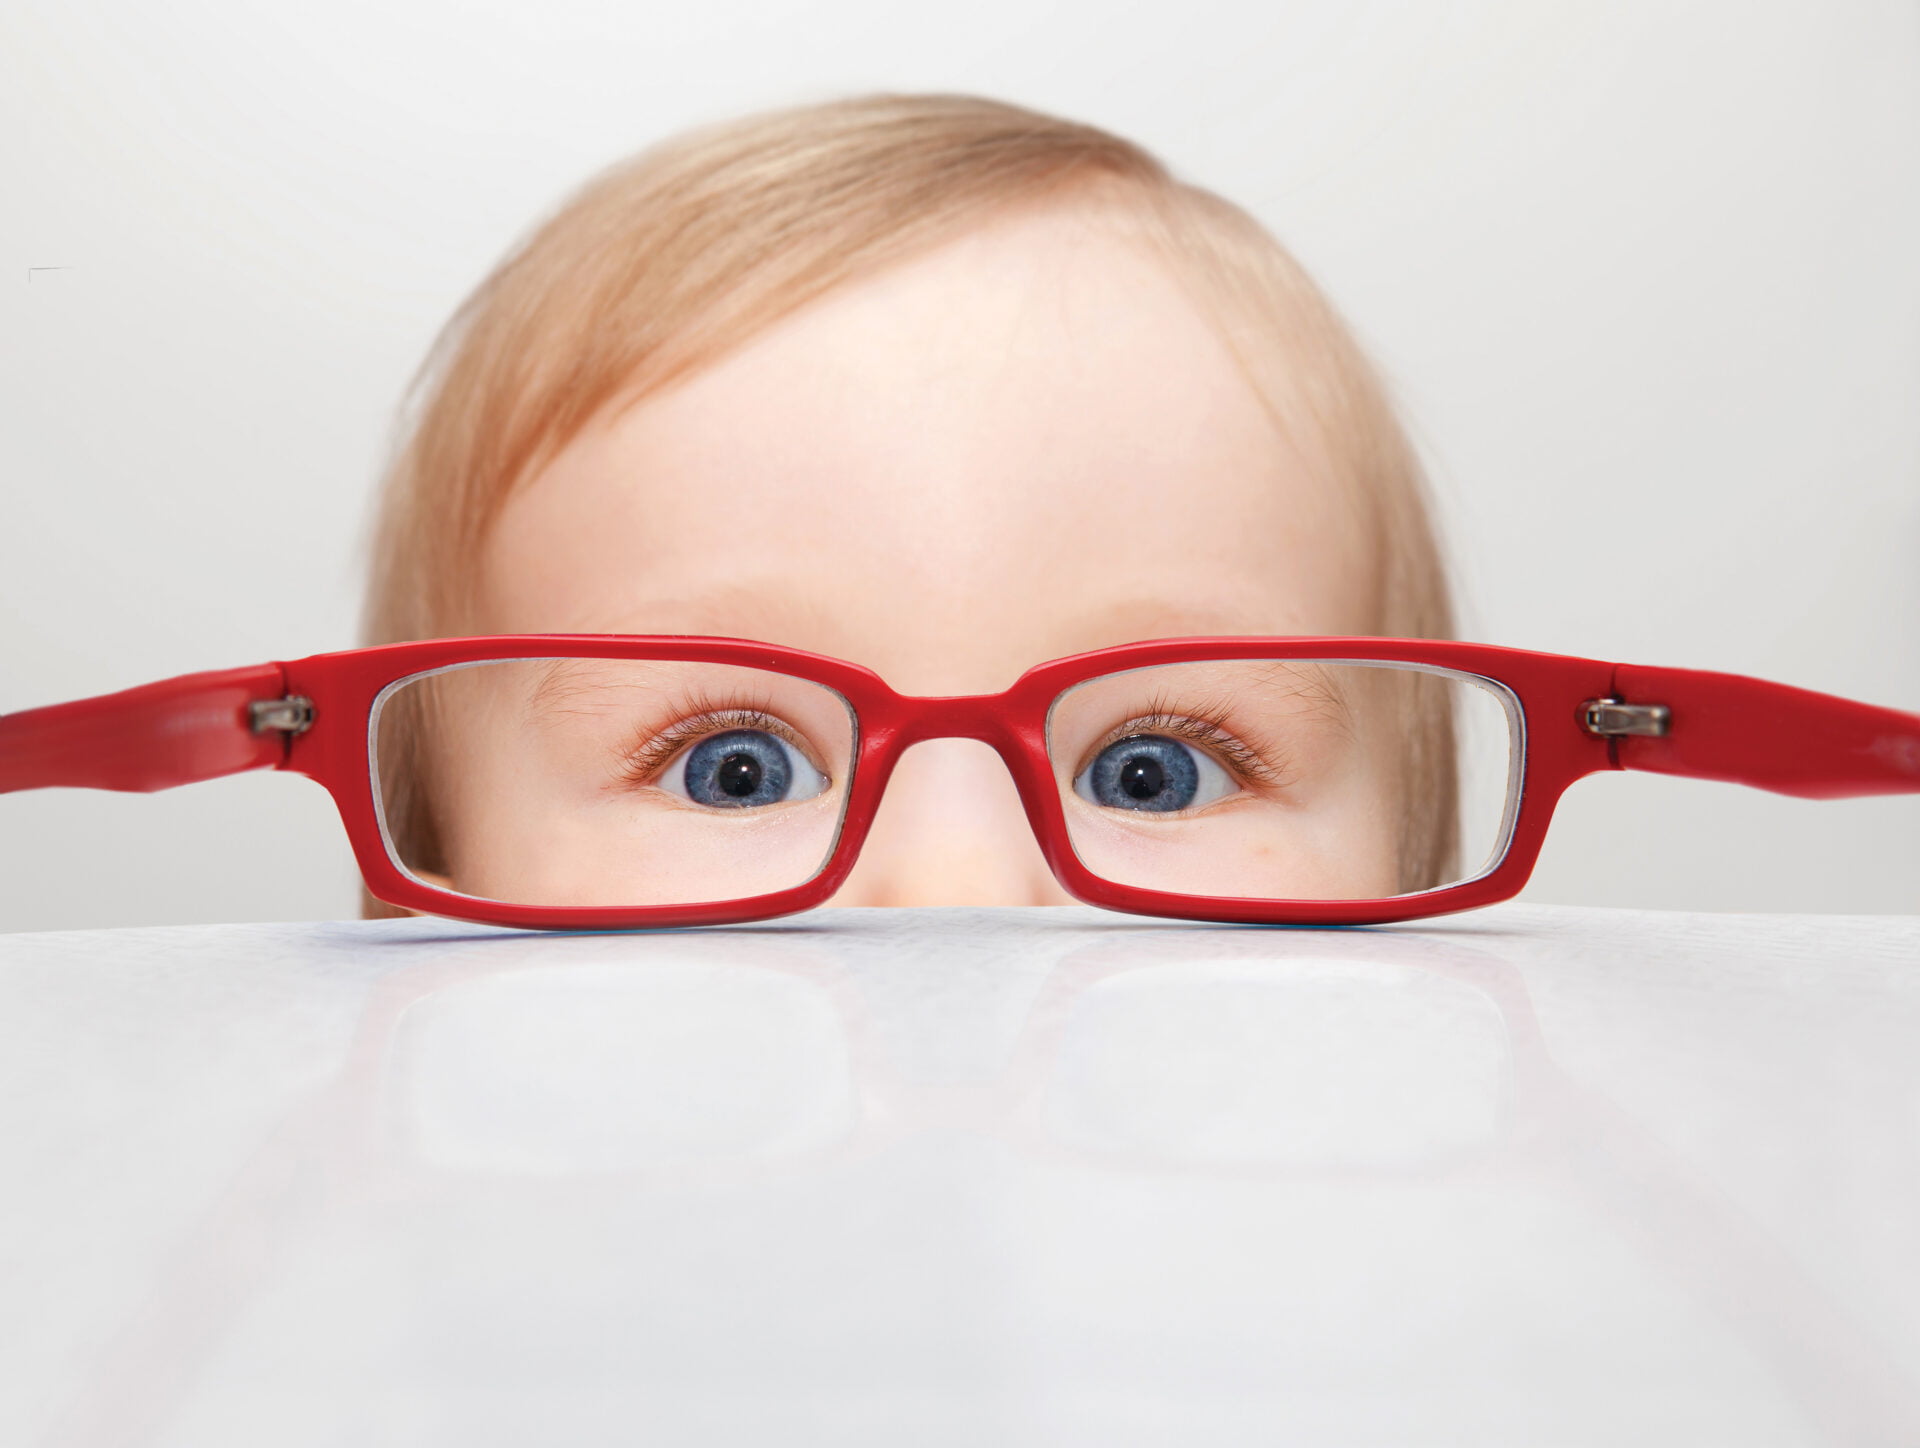 Little boy with red glasses peeking over the table